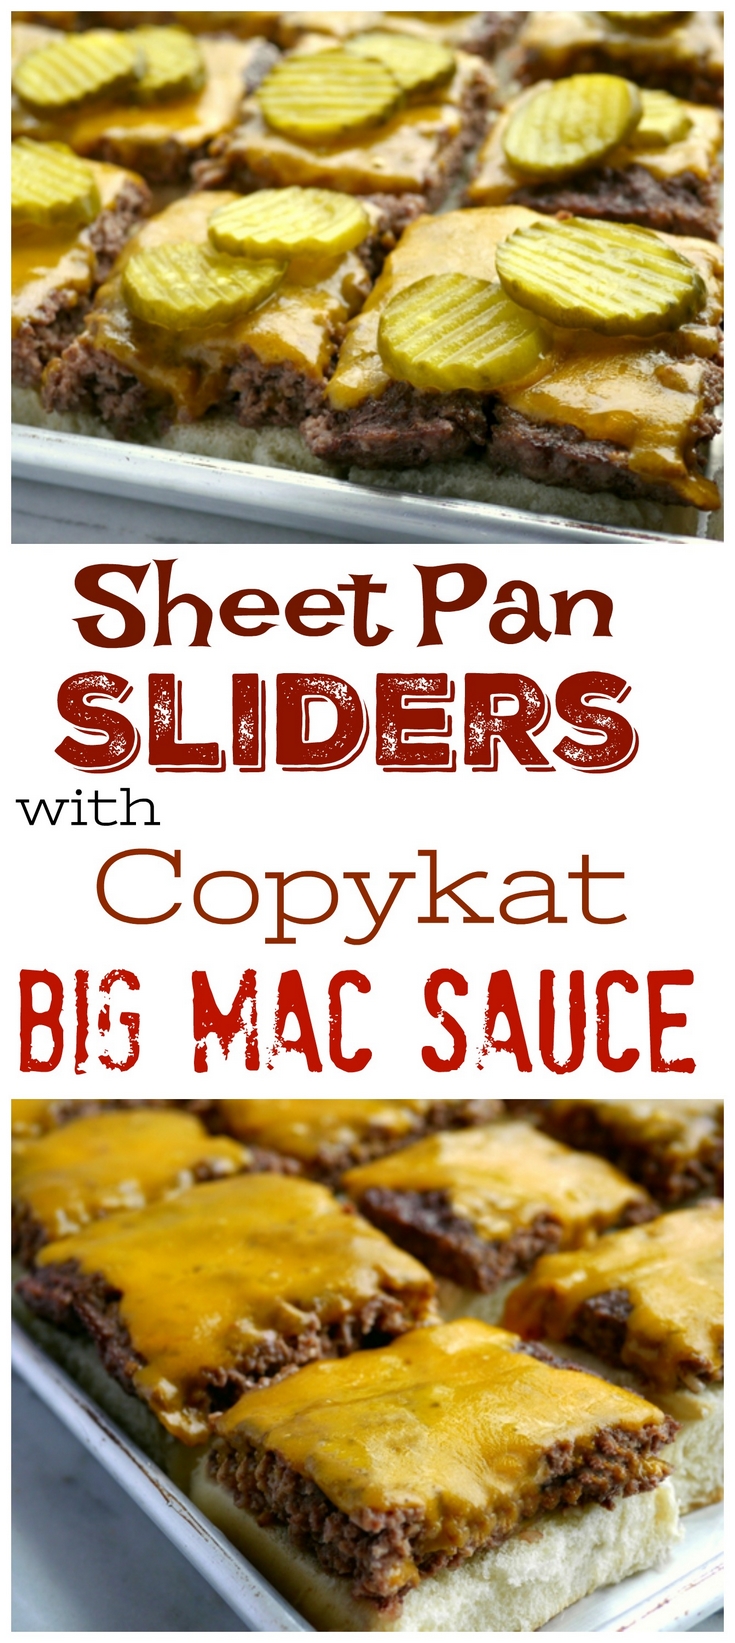 Dinner for a crowd just got easier with these Sheet Pan Sliders with Copykat Big Mac Sauce. The perfect juicy burger with your favorite burger sauce just became effortless from NoblePig.com. via @cmpollak1